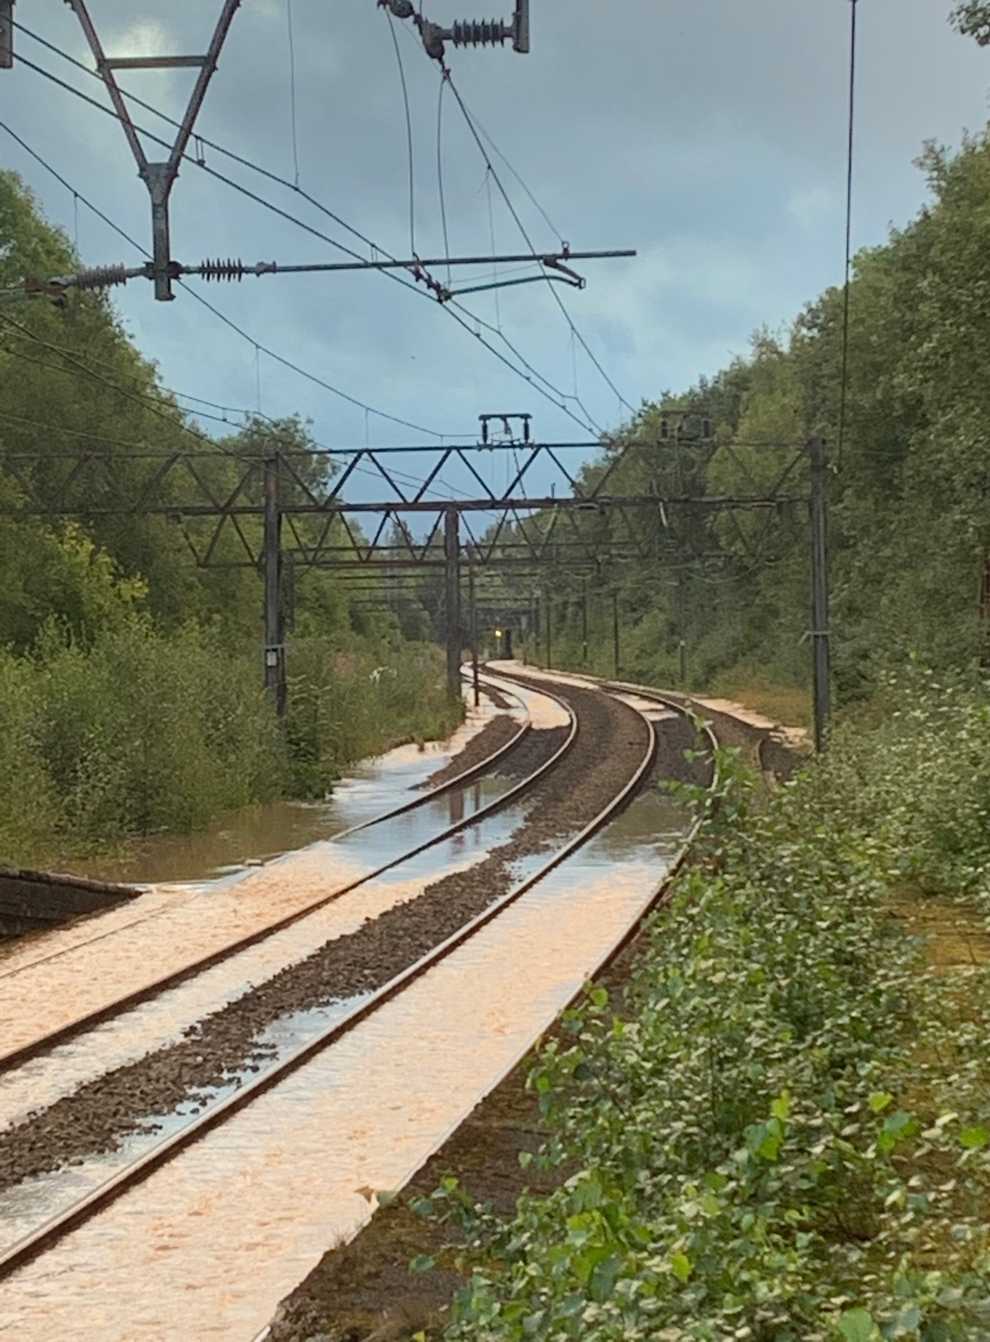 Train services in parts of northern England are severely disrupted after a burst water main flooded tracks (Network Rail/PA)